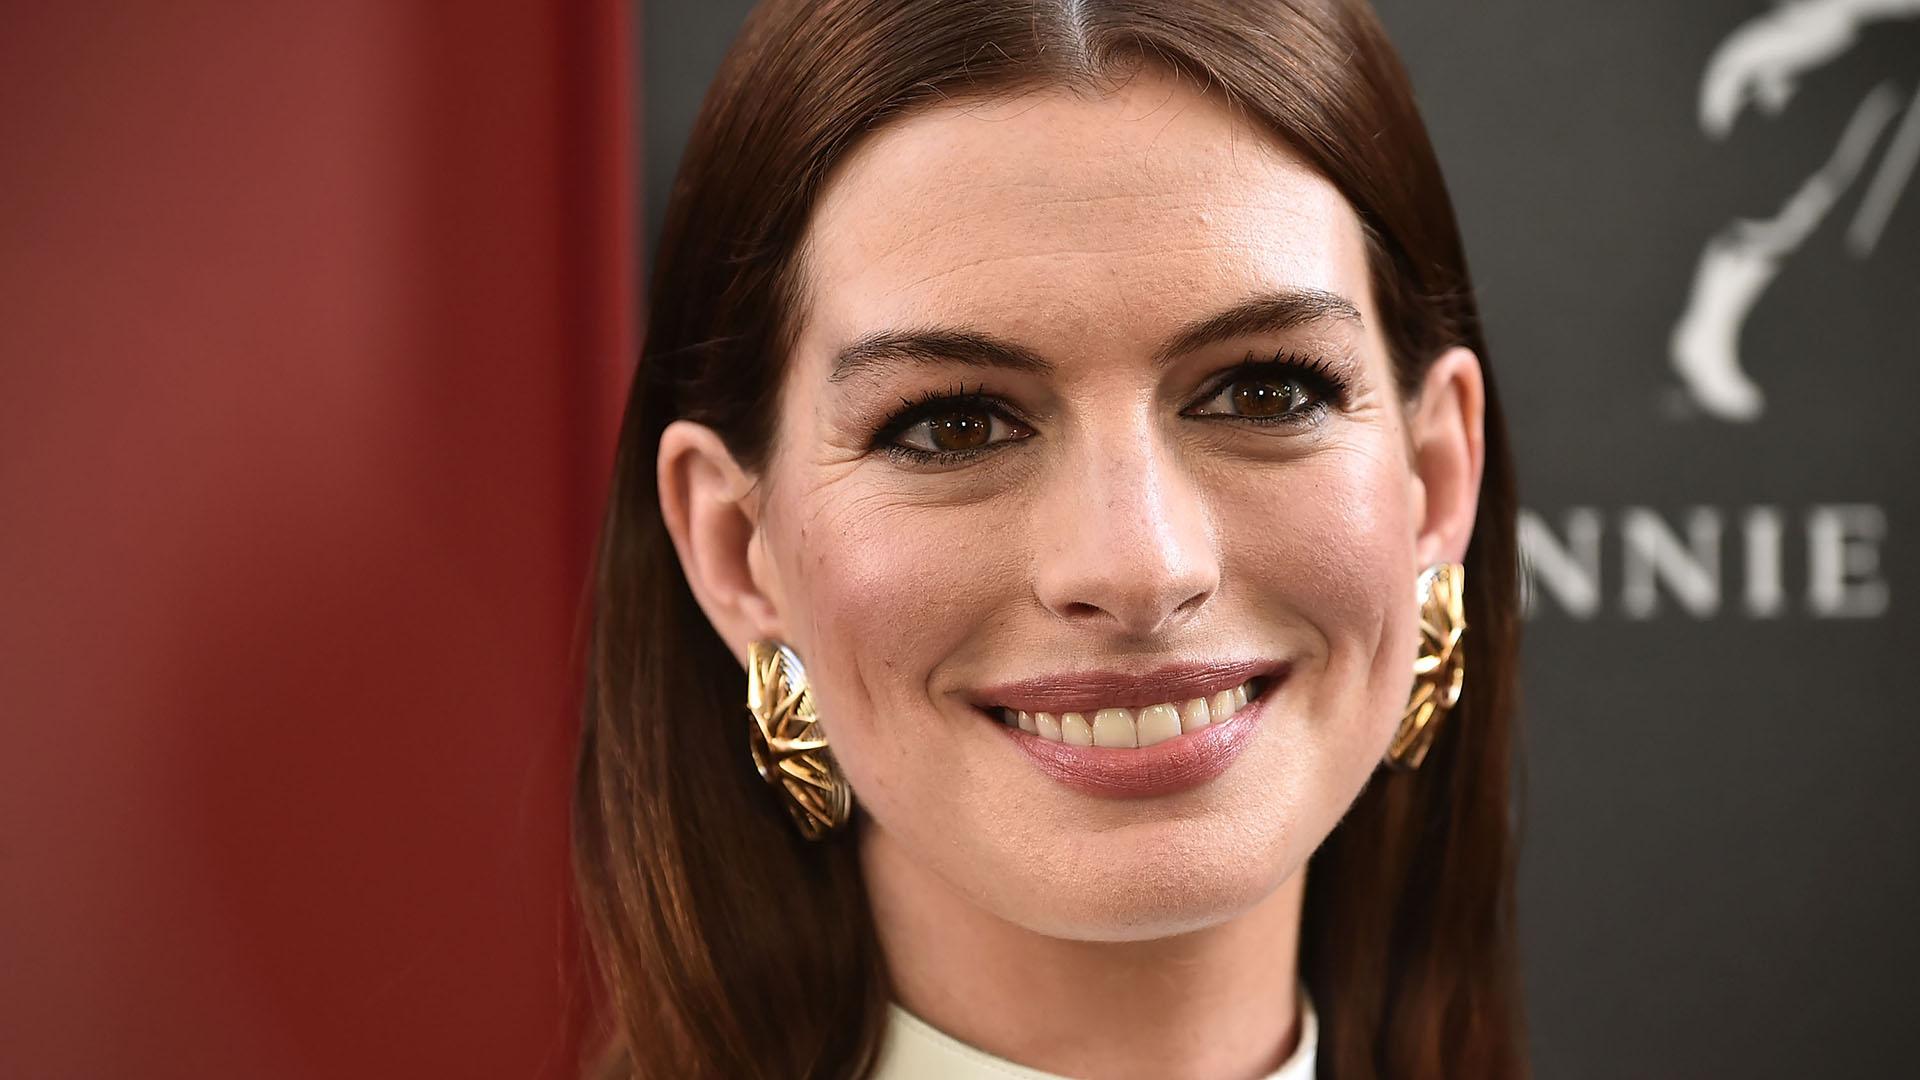 Princess Diaries 3 Is Happening & Mandy Moore Might Be in It